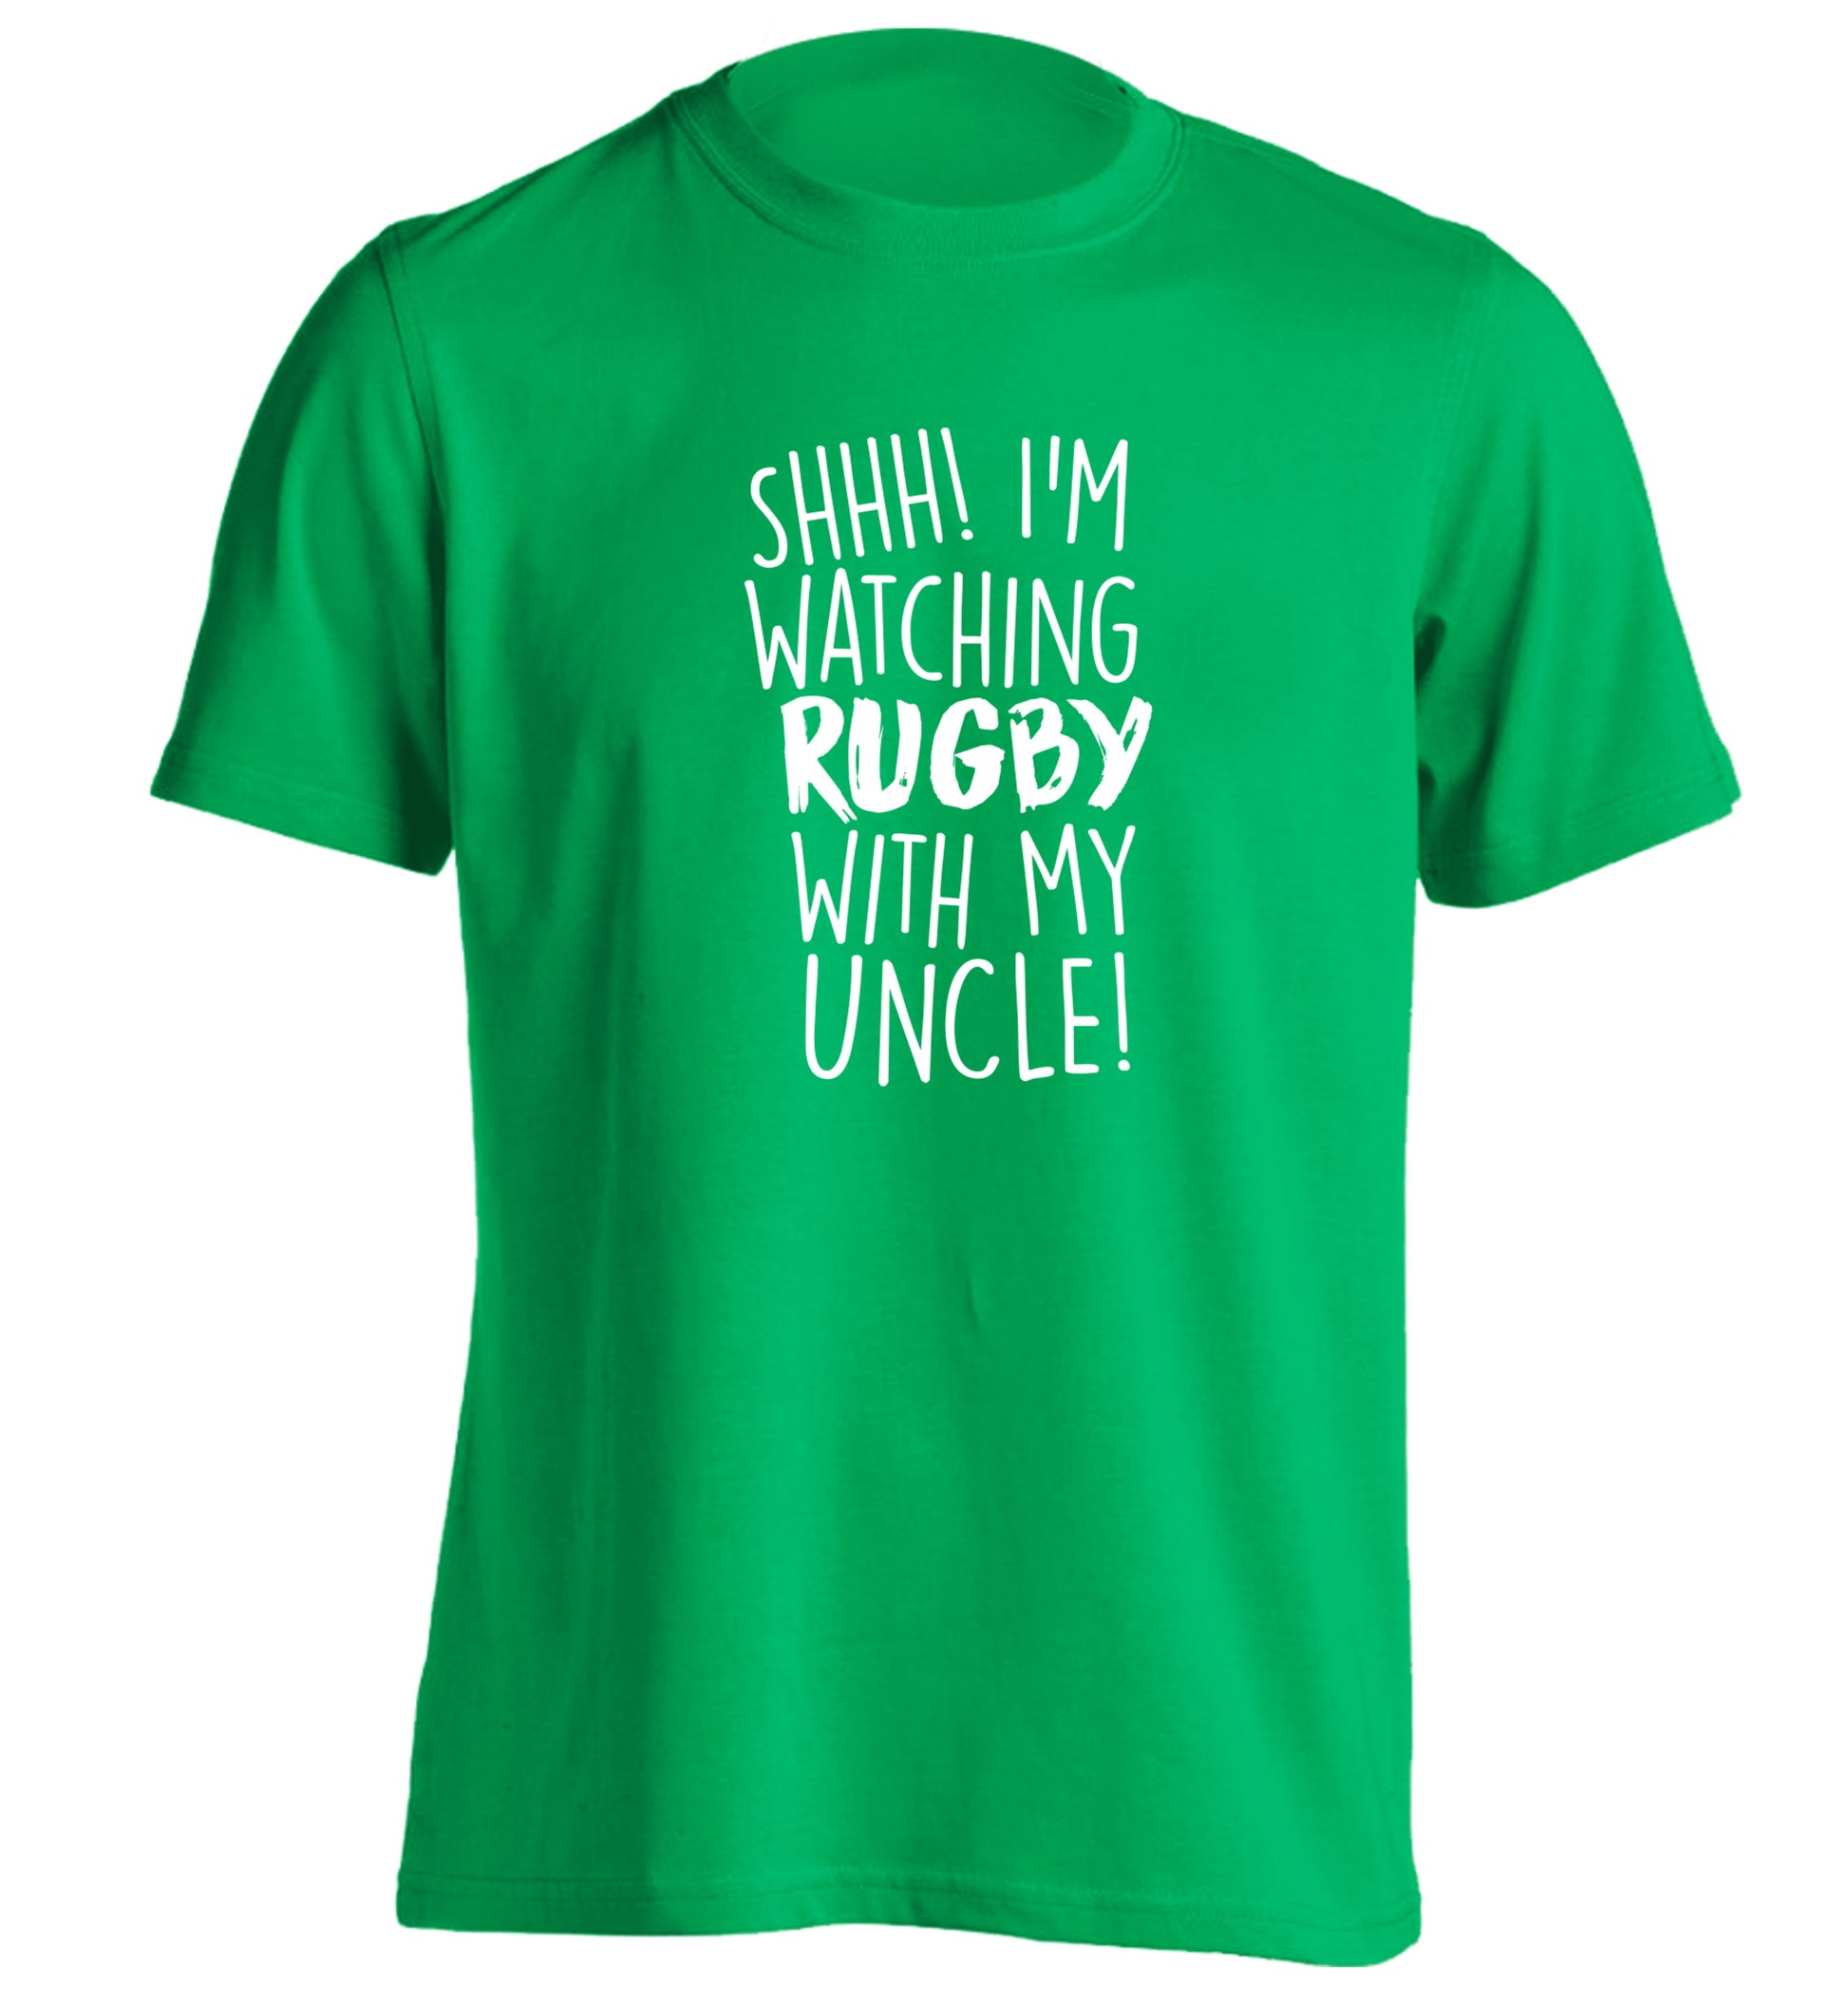 Shh.. I'm watching rugby with my uncle adults unisex green Tshirt 2XL